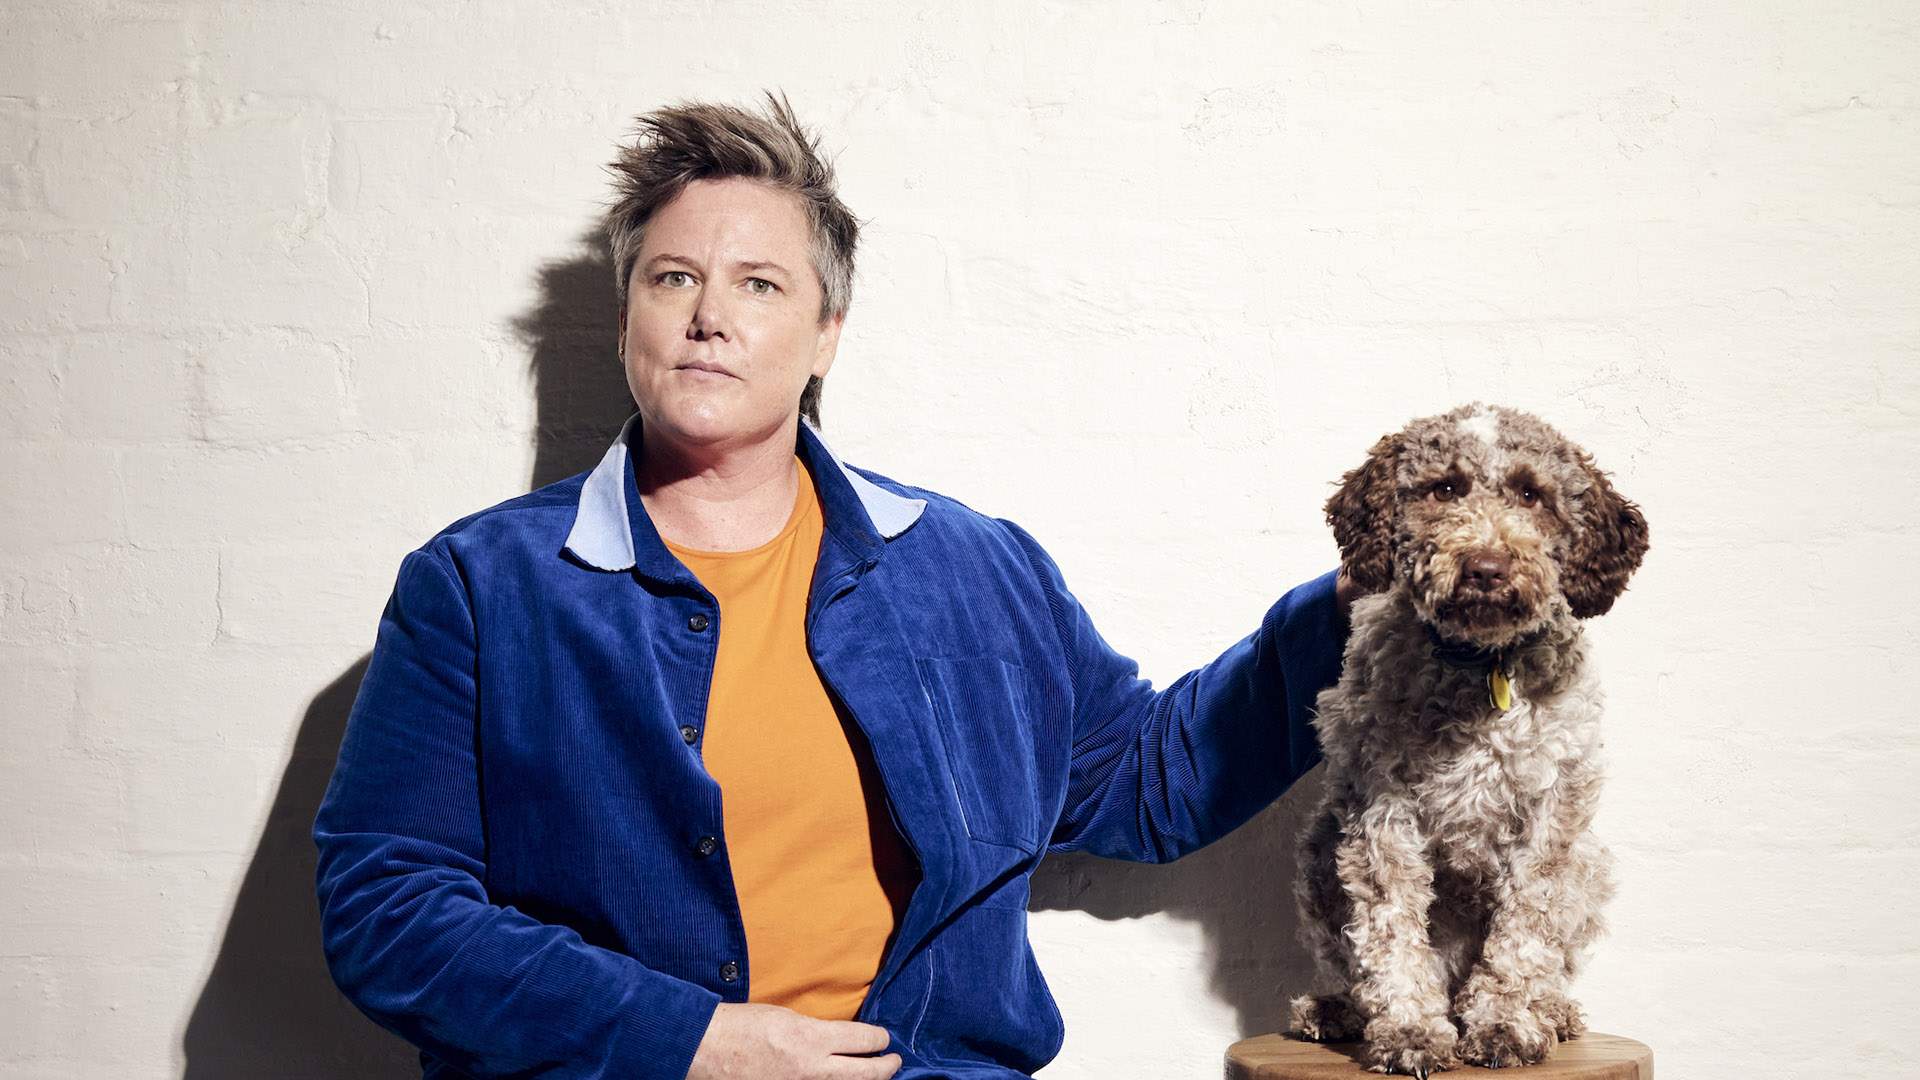 Hannah Gadsby's New Stand-Up Show 'Woof!' Will Premiere in Australia This Autumn